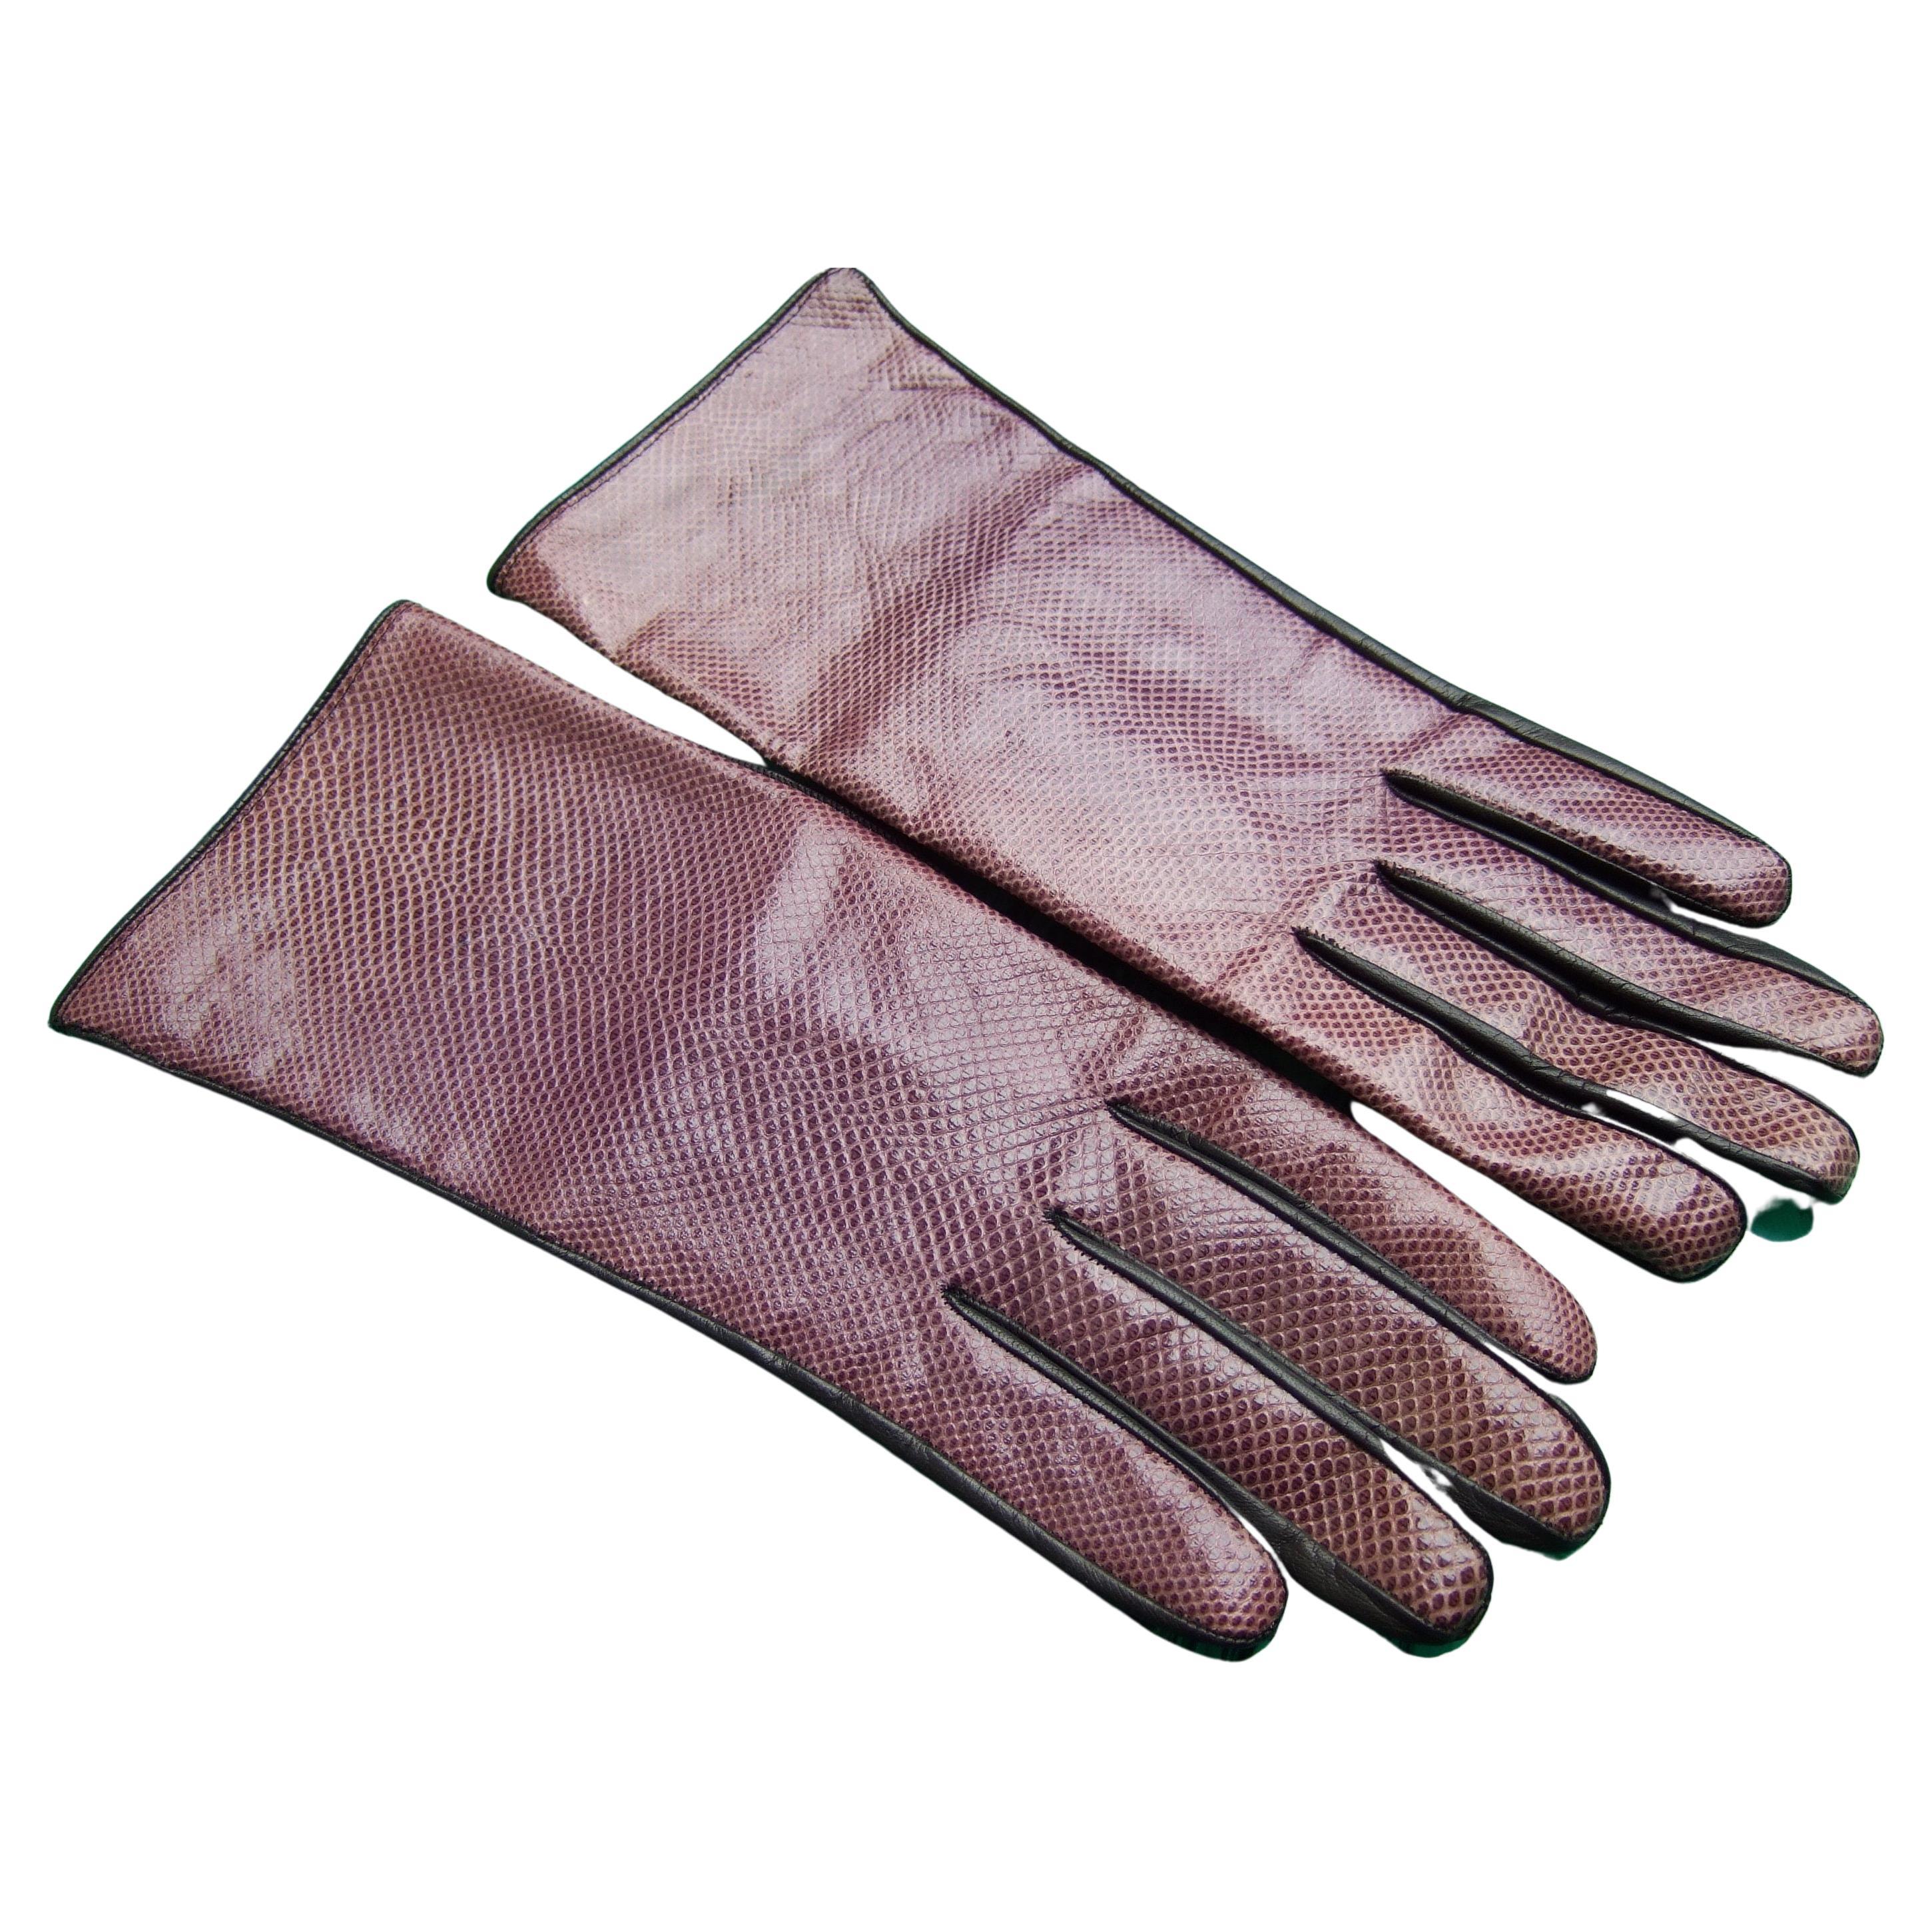 Yves Saint Laurent Chic Embossed Purple Leather Gloves Size 7 c 1980s For Sale